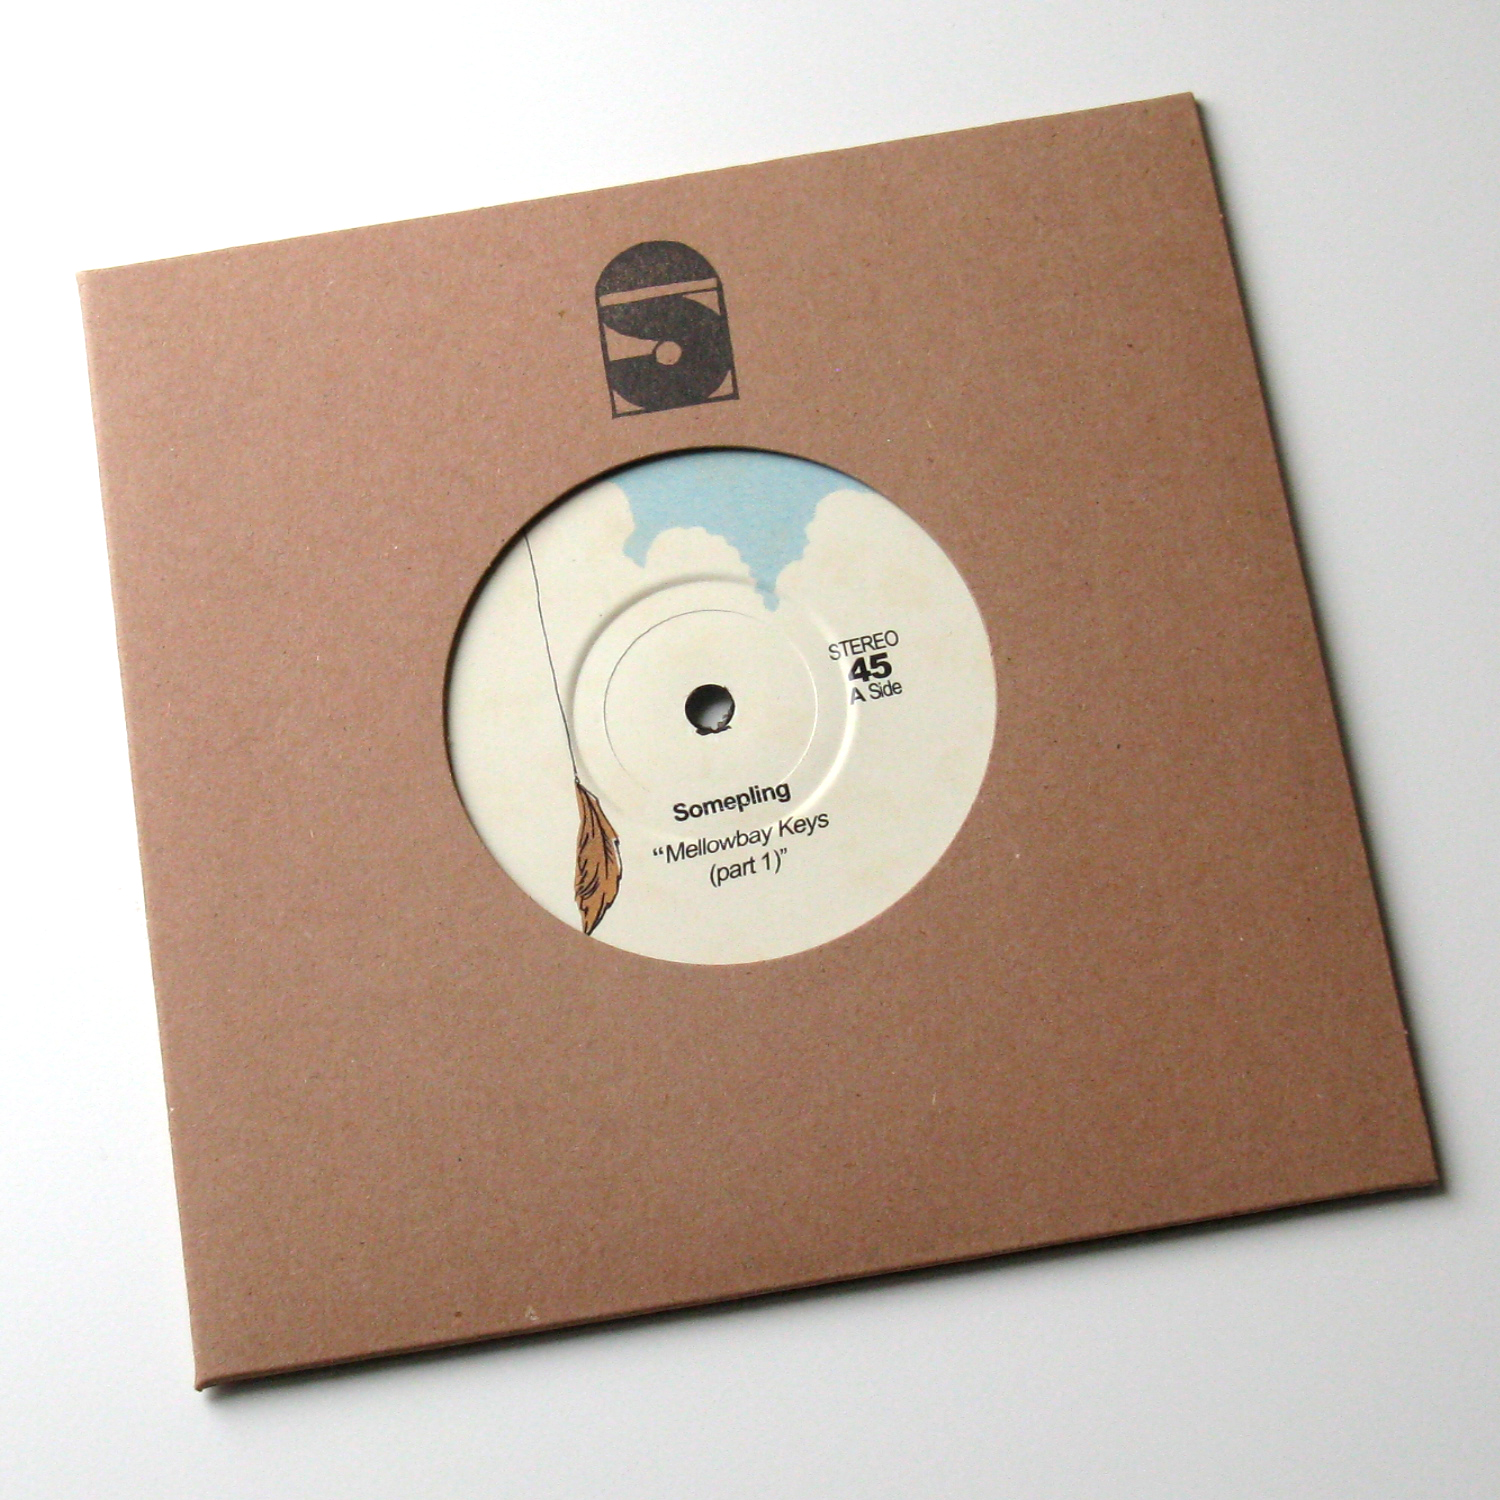 News: Self-released vinyl record by Somepling